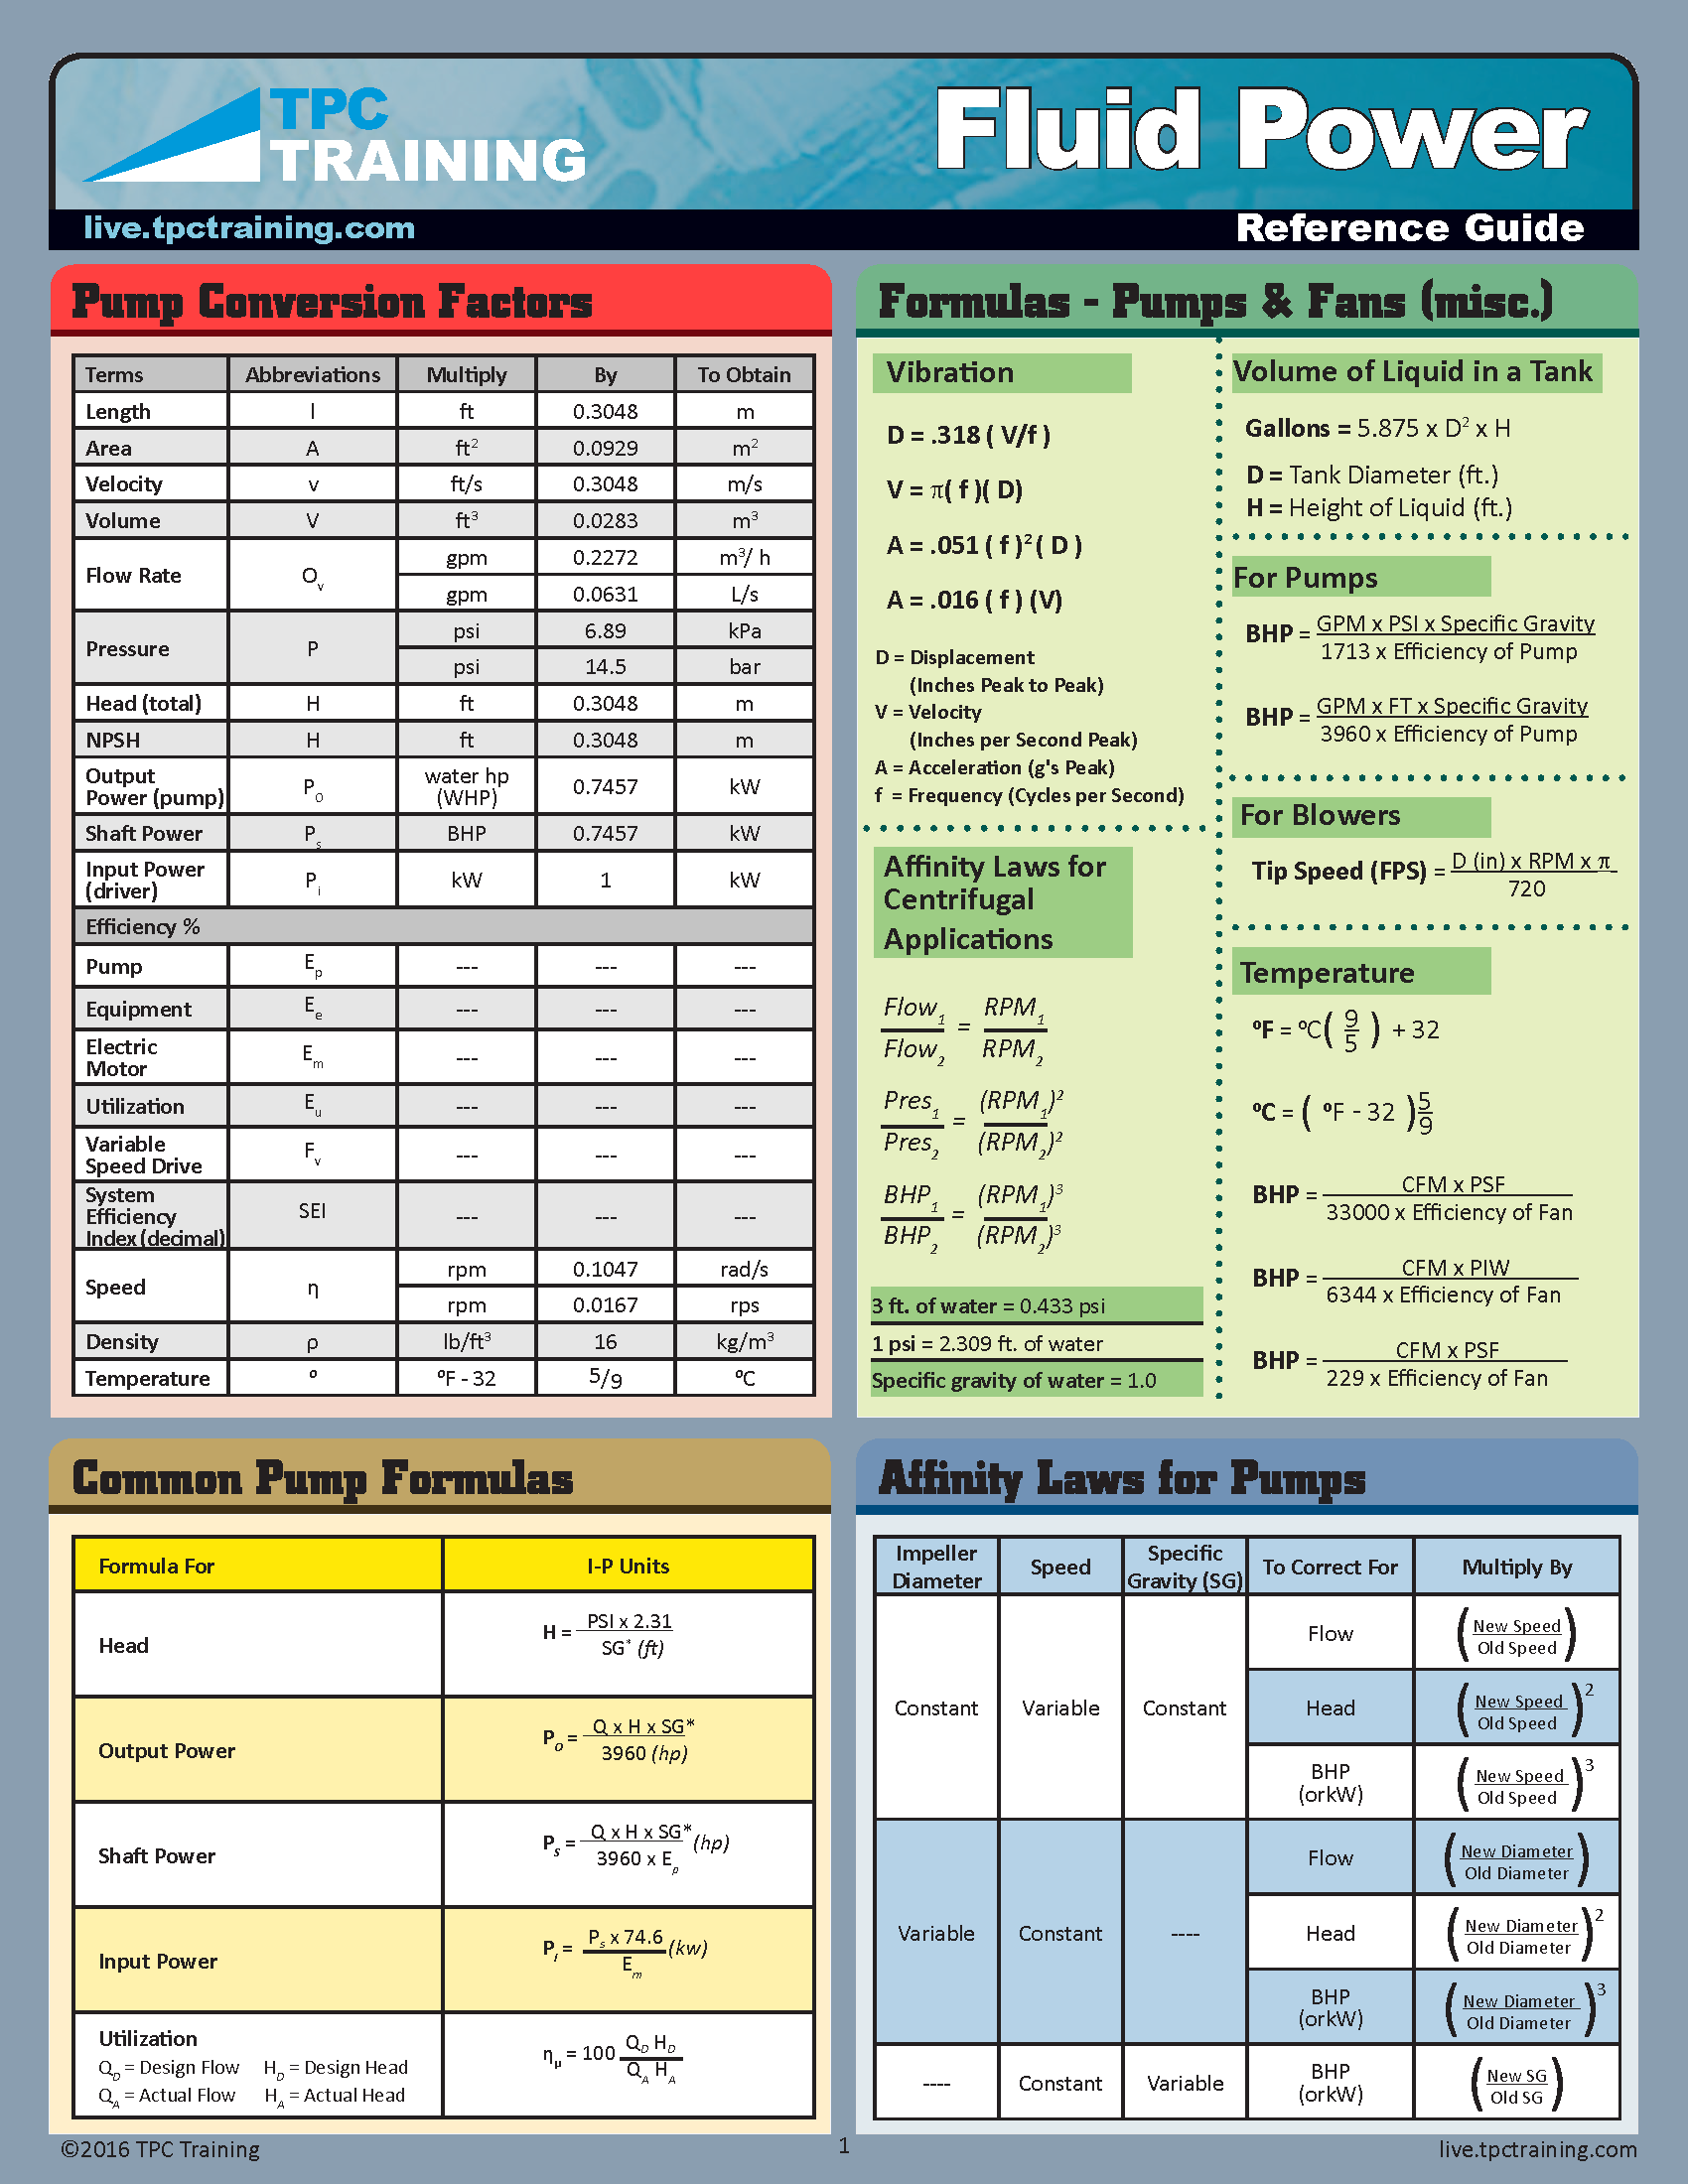 Fluid Power Quick Reference Guide